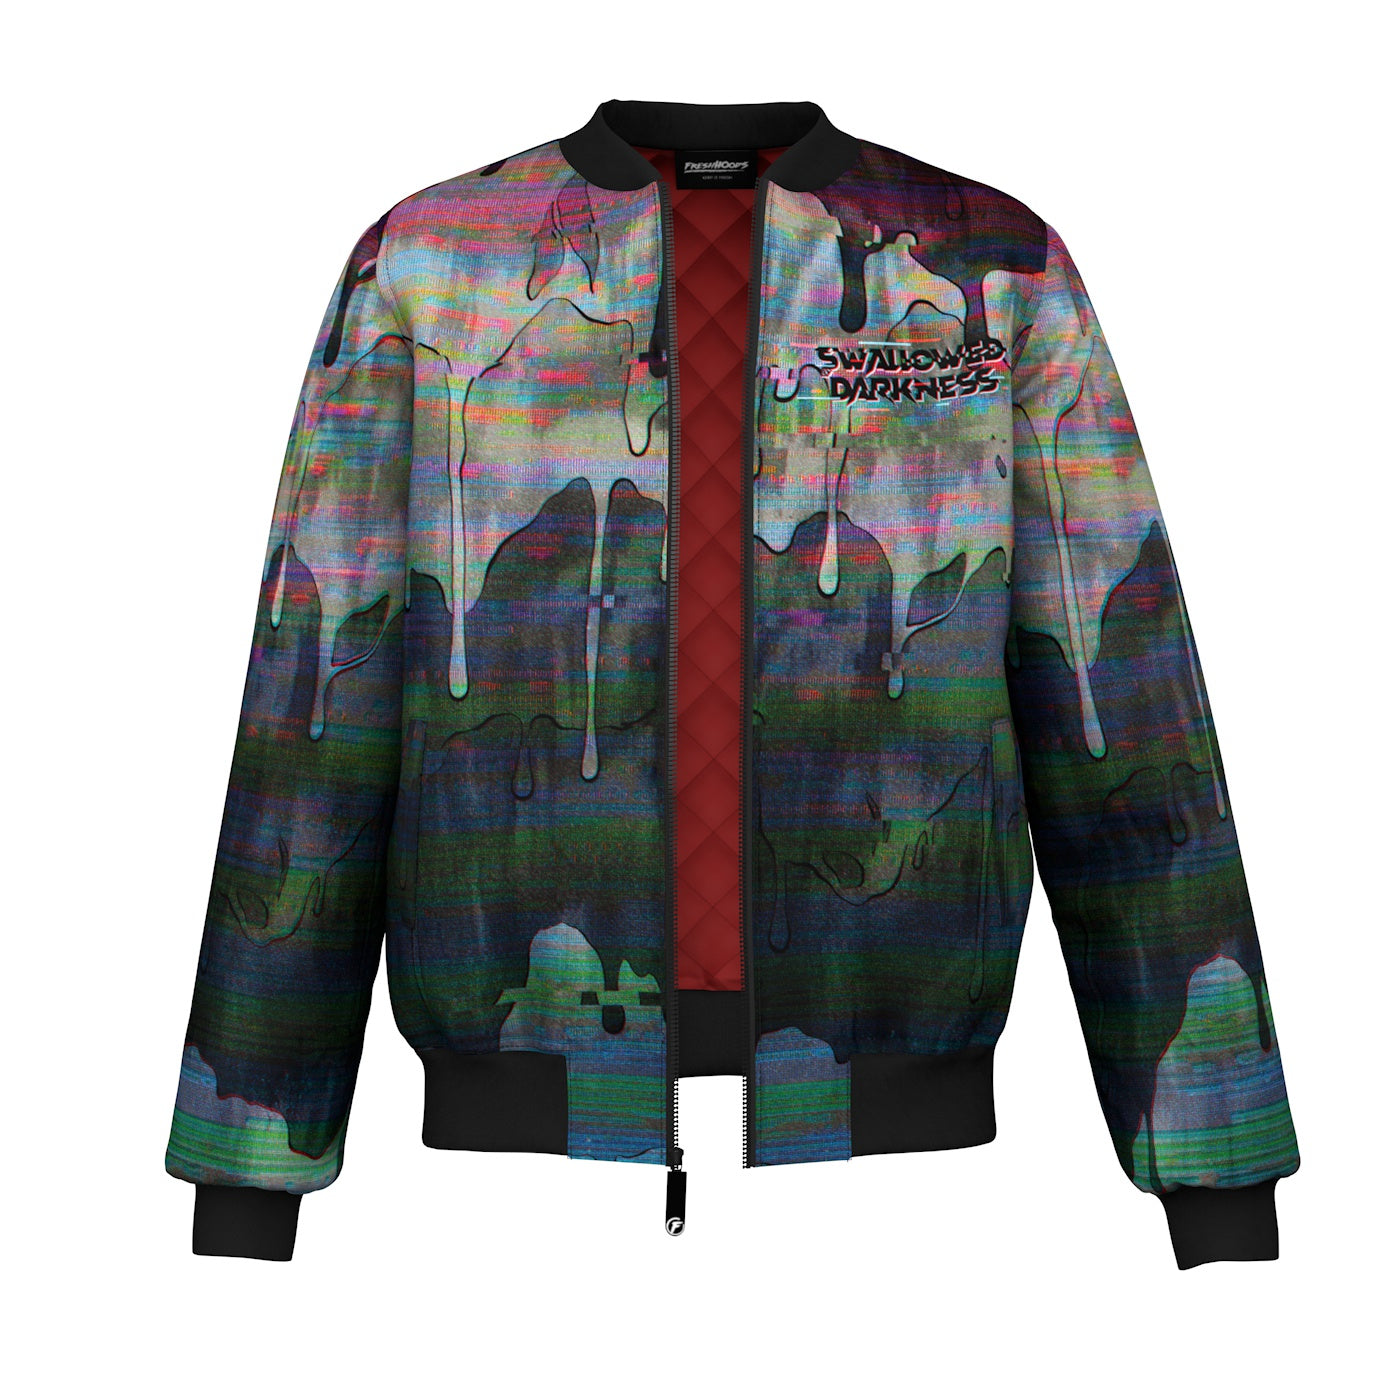 Swallowed By Darkness Bomber Jacket